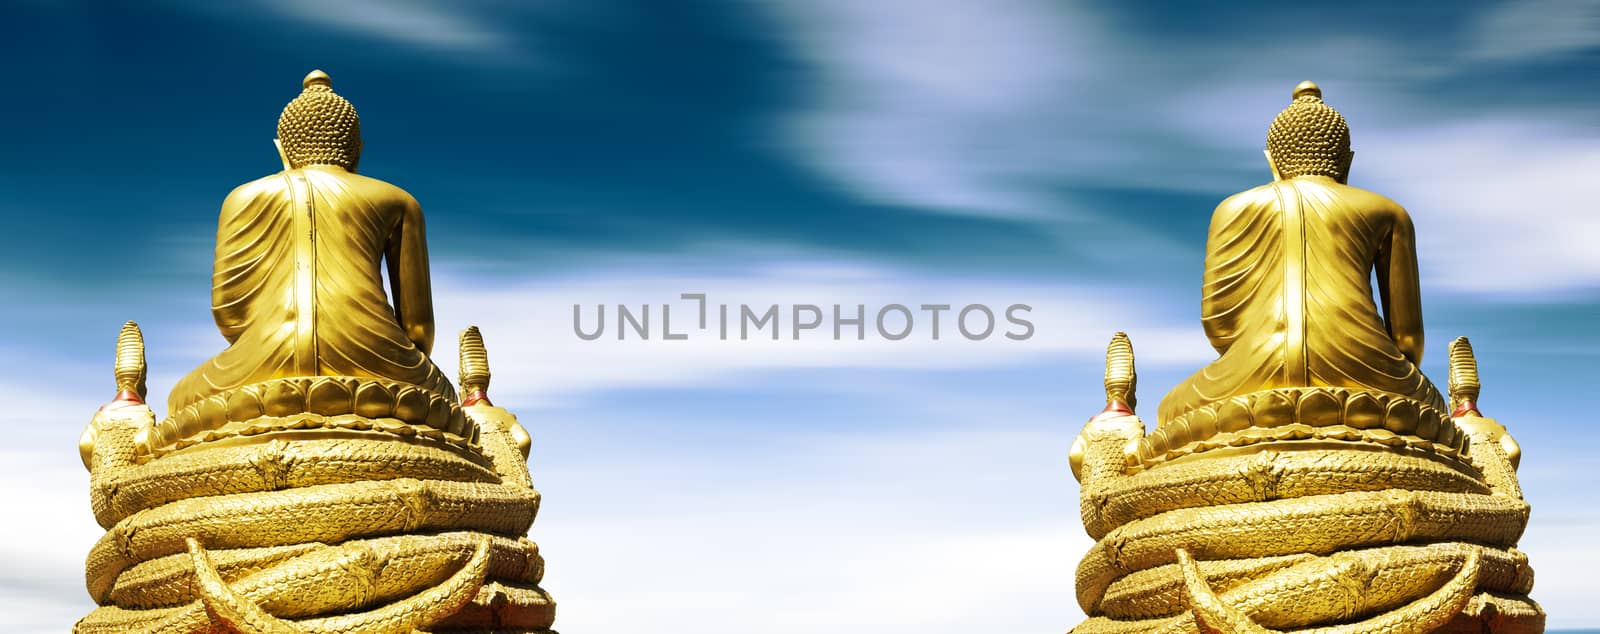 Golden Buddha statue over blue sky background.Asian and buddhist culture